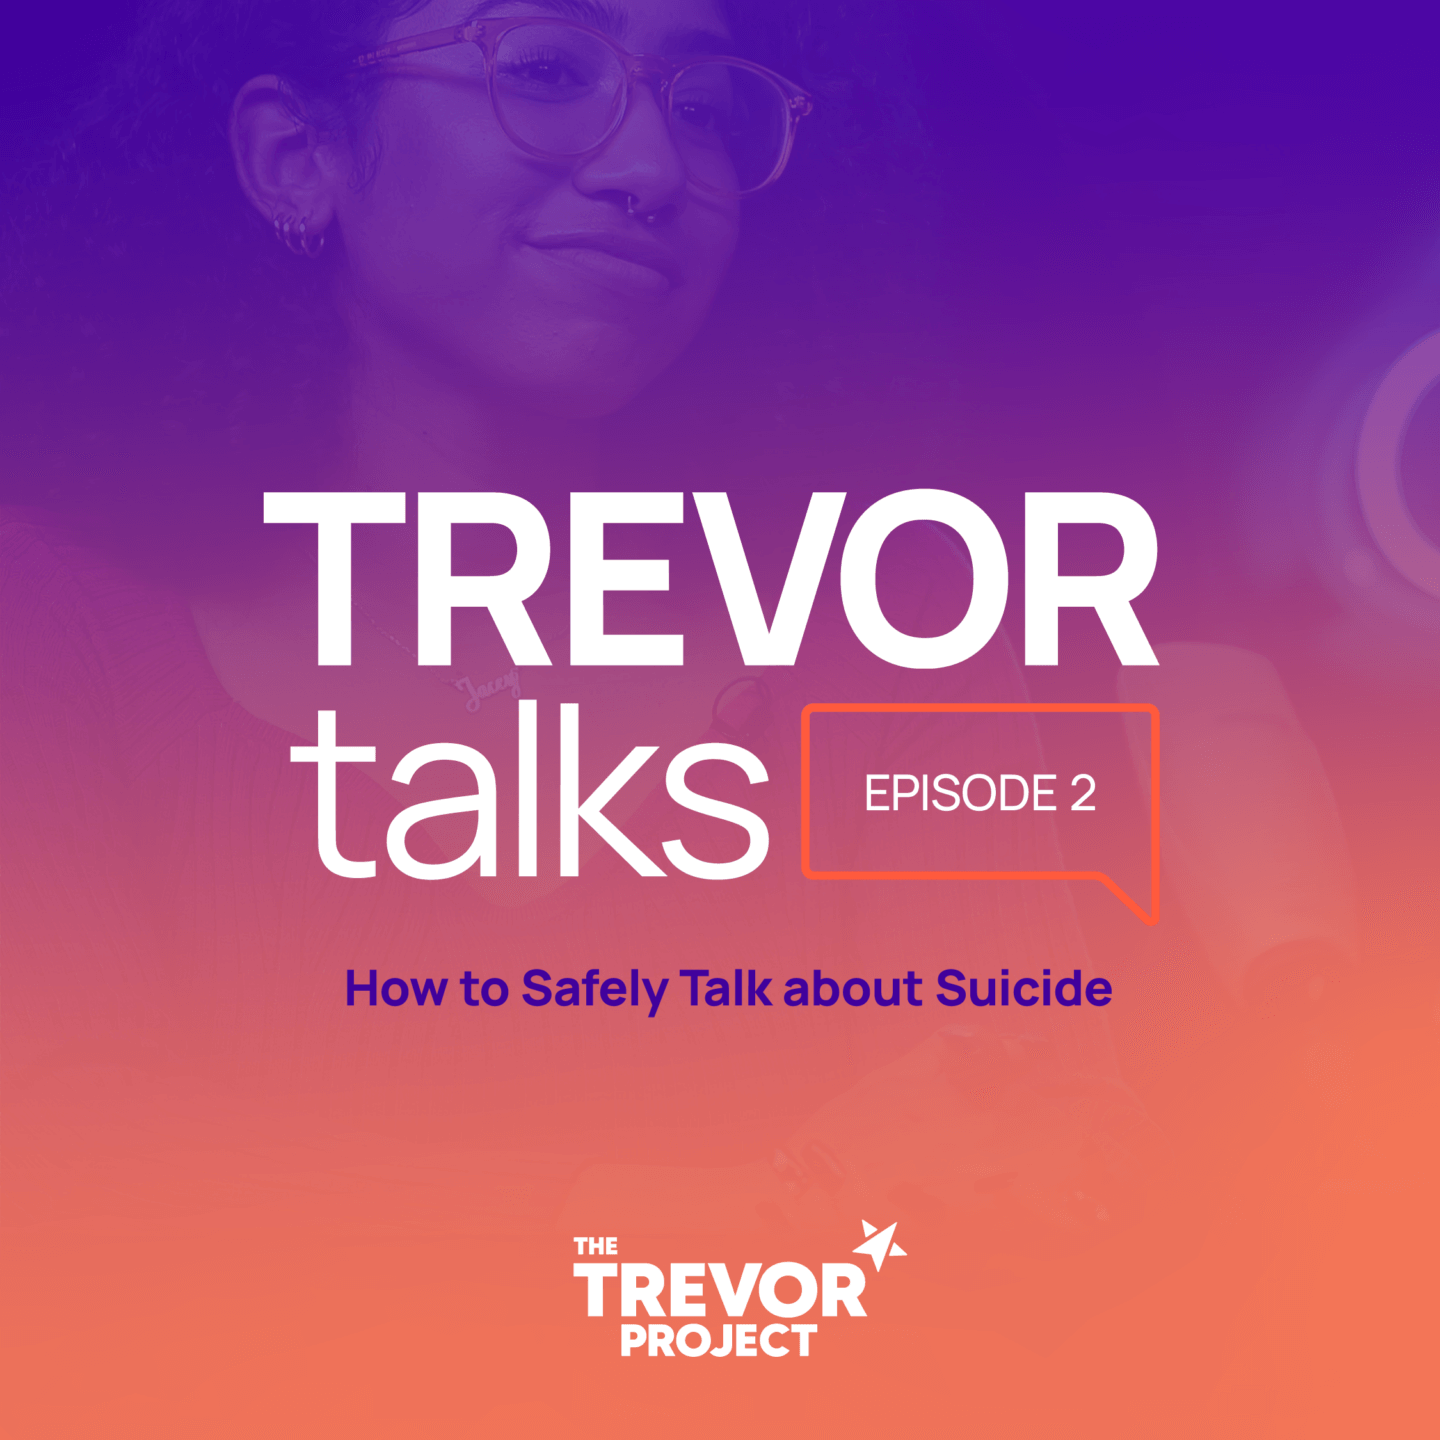 Trevor Talks Episode two logo How to talk safely about suicide.